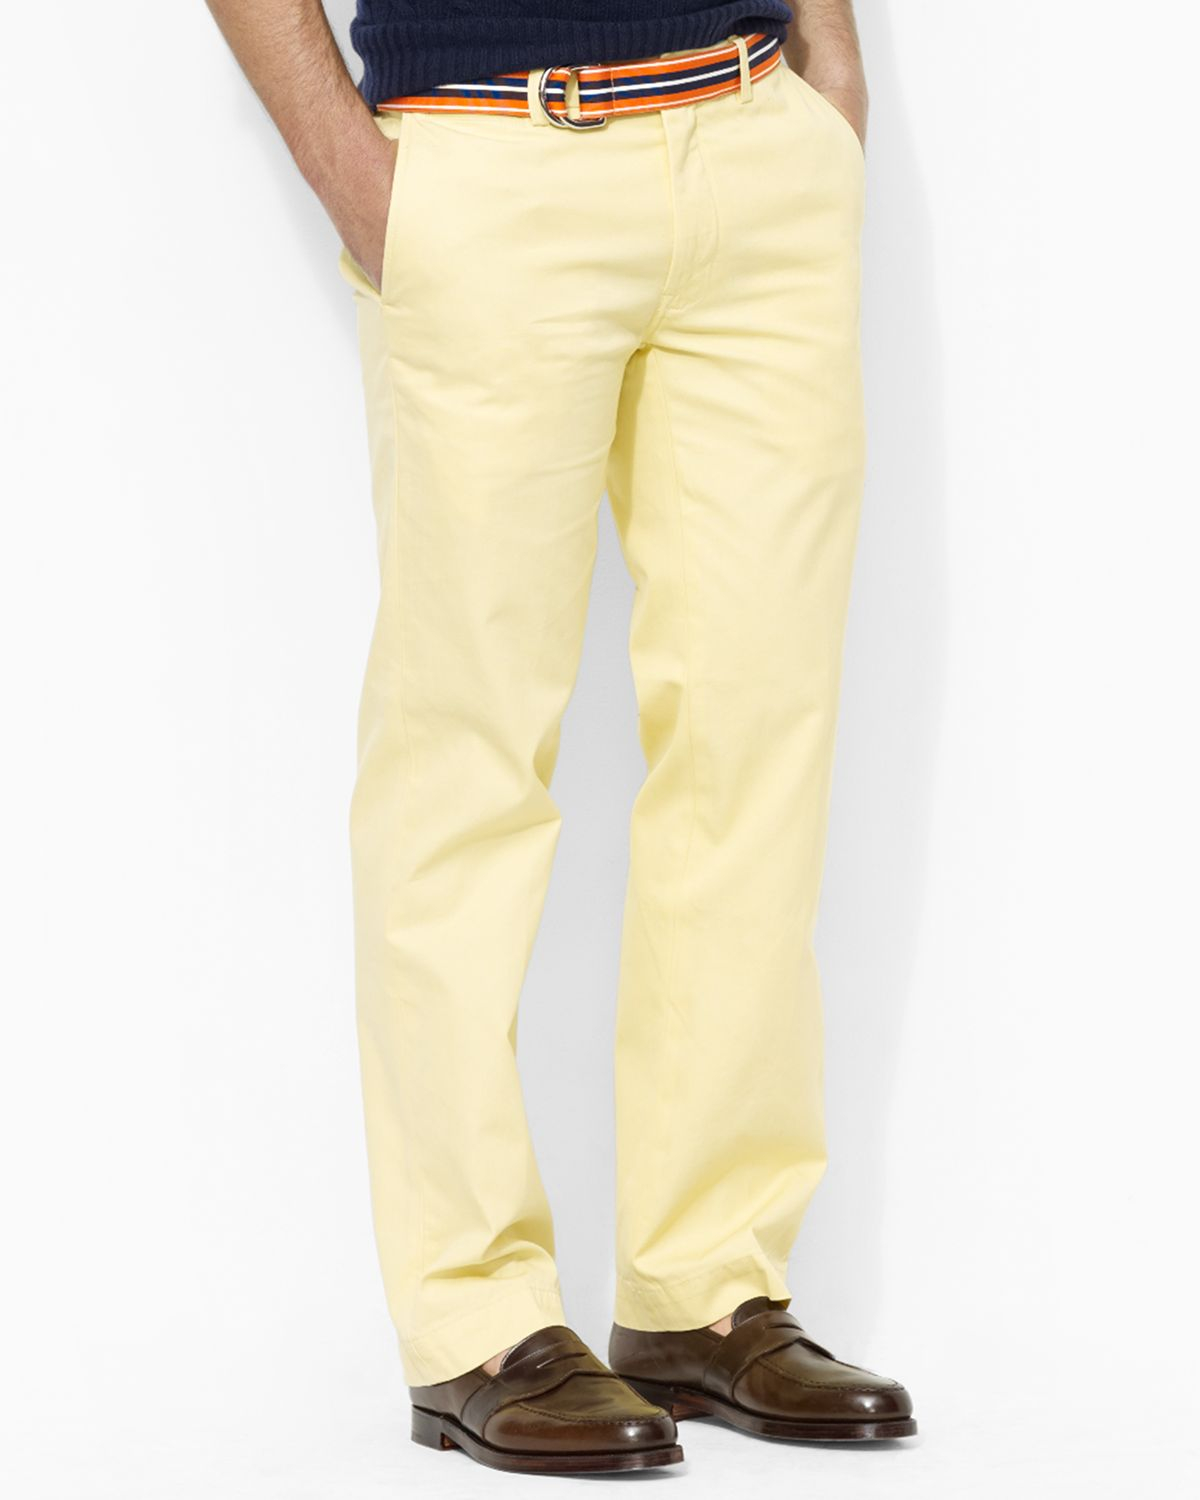 Lyst - Ralph Lauren Polo Classicfit Lightweight Military Chino Pant in ...